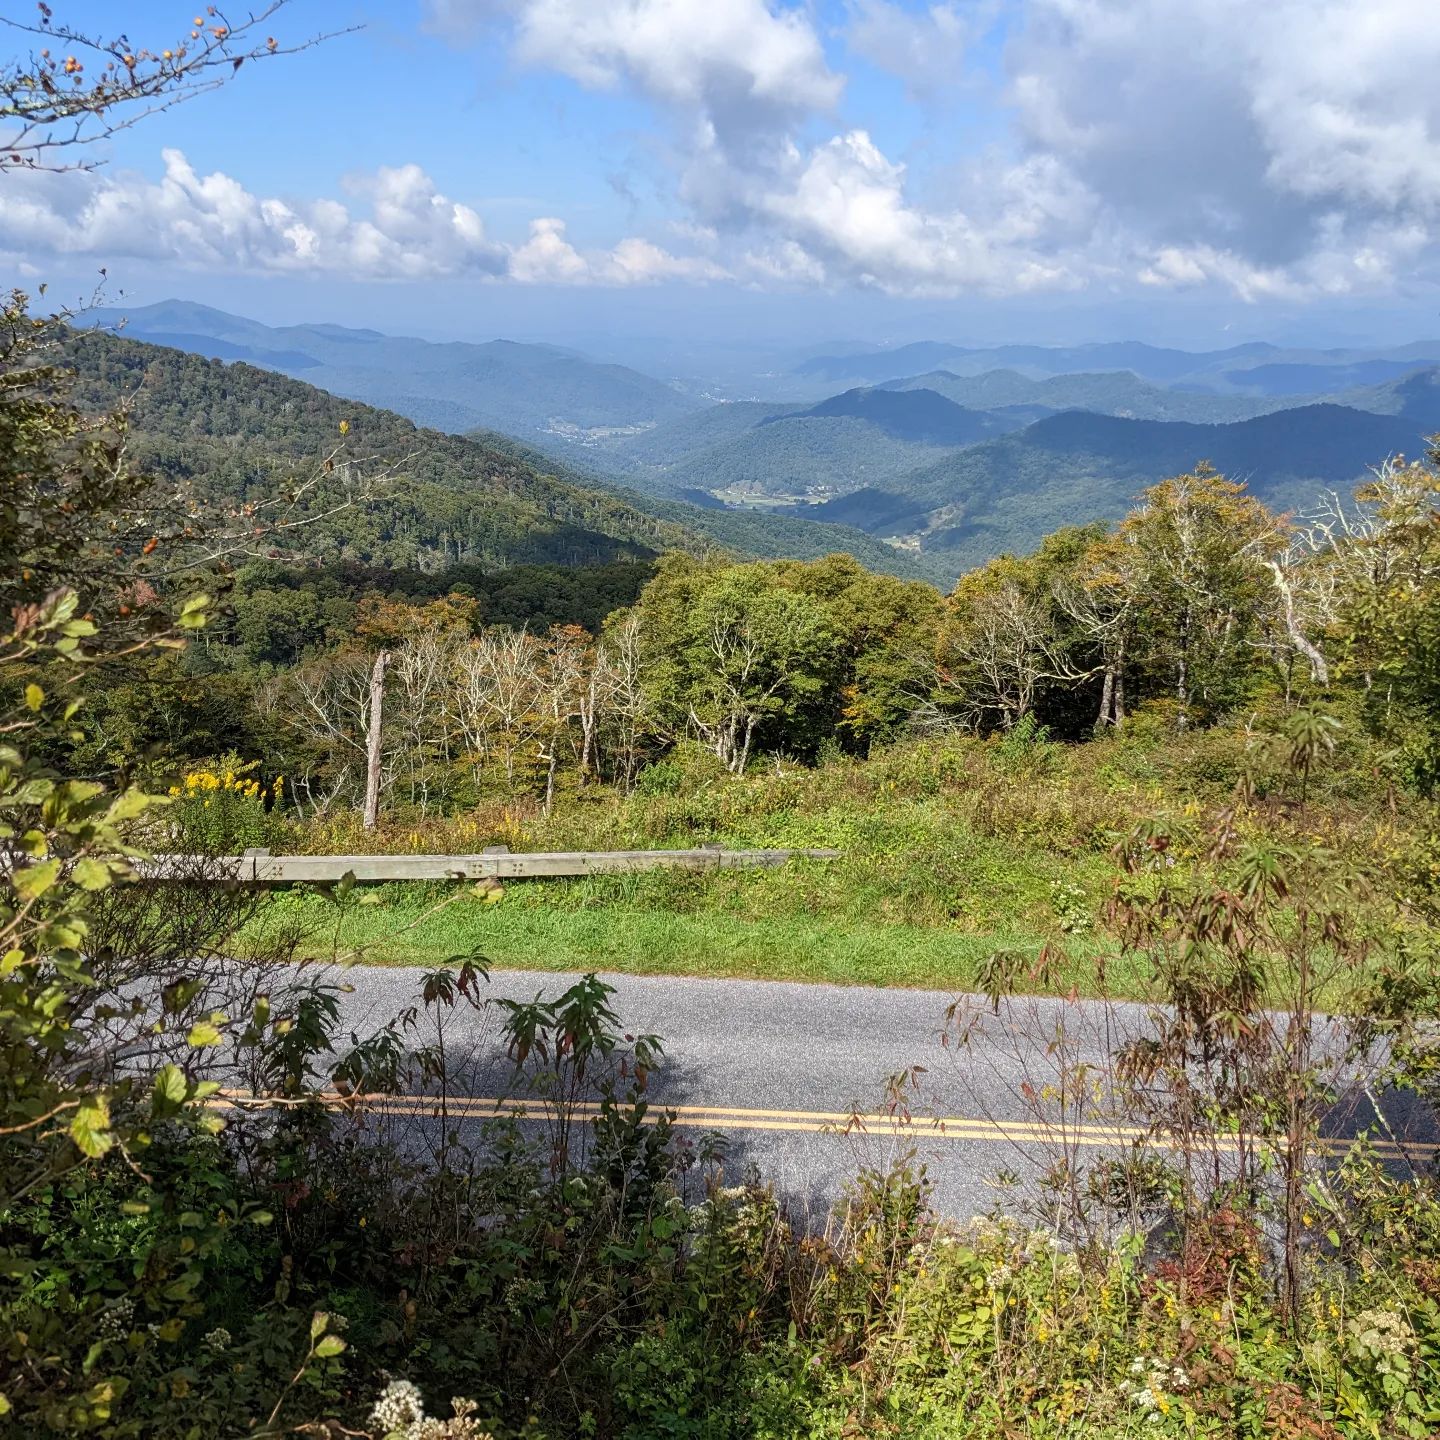 The Blue Ridge Parkway wasn't actually on my original plan... It is now